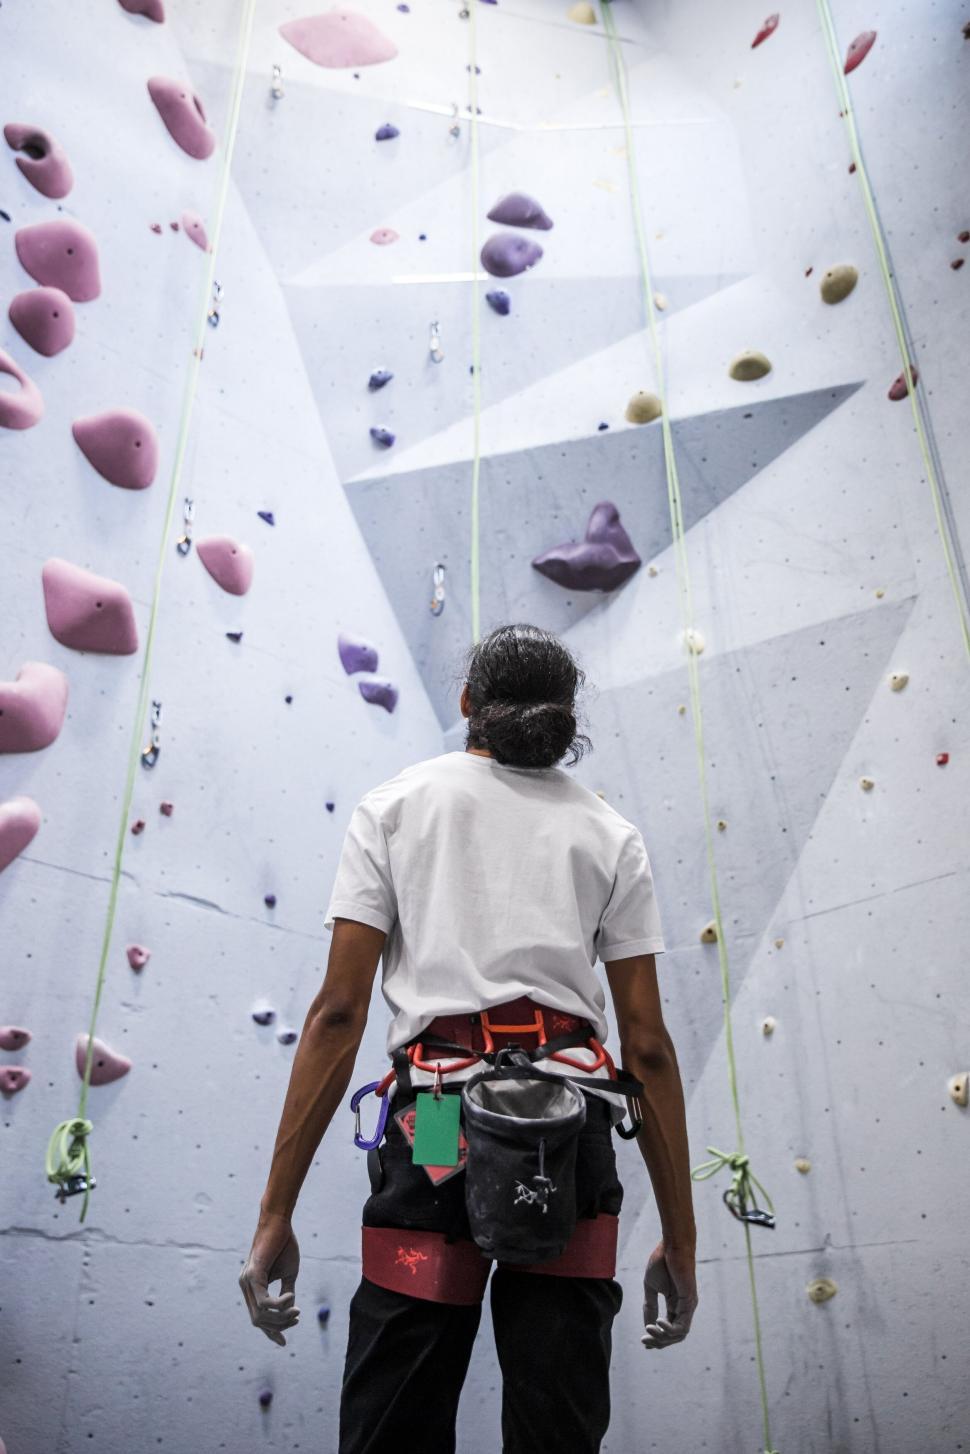 Free Image of Climber preparing for wall ascent at gym 